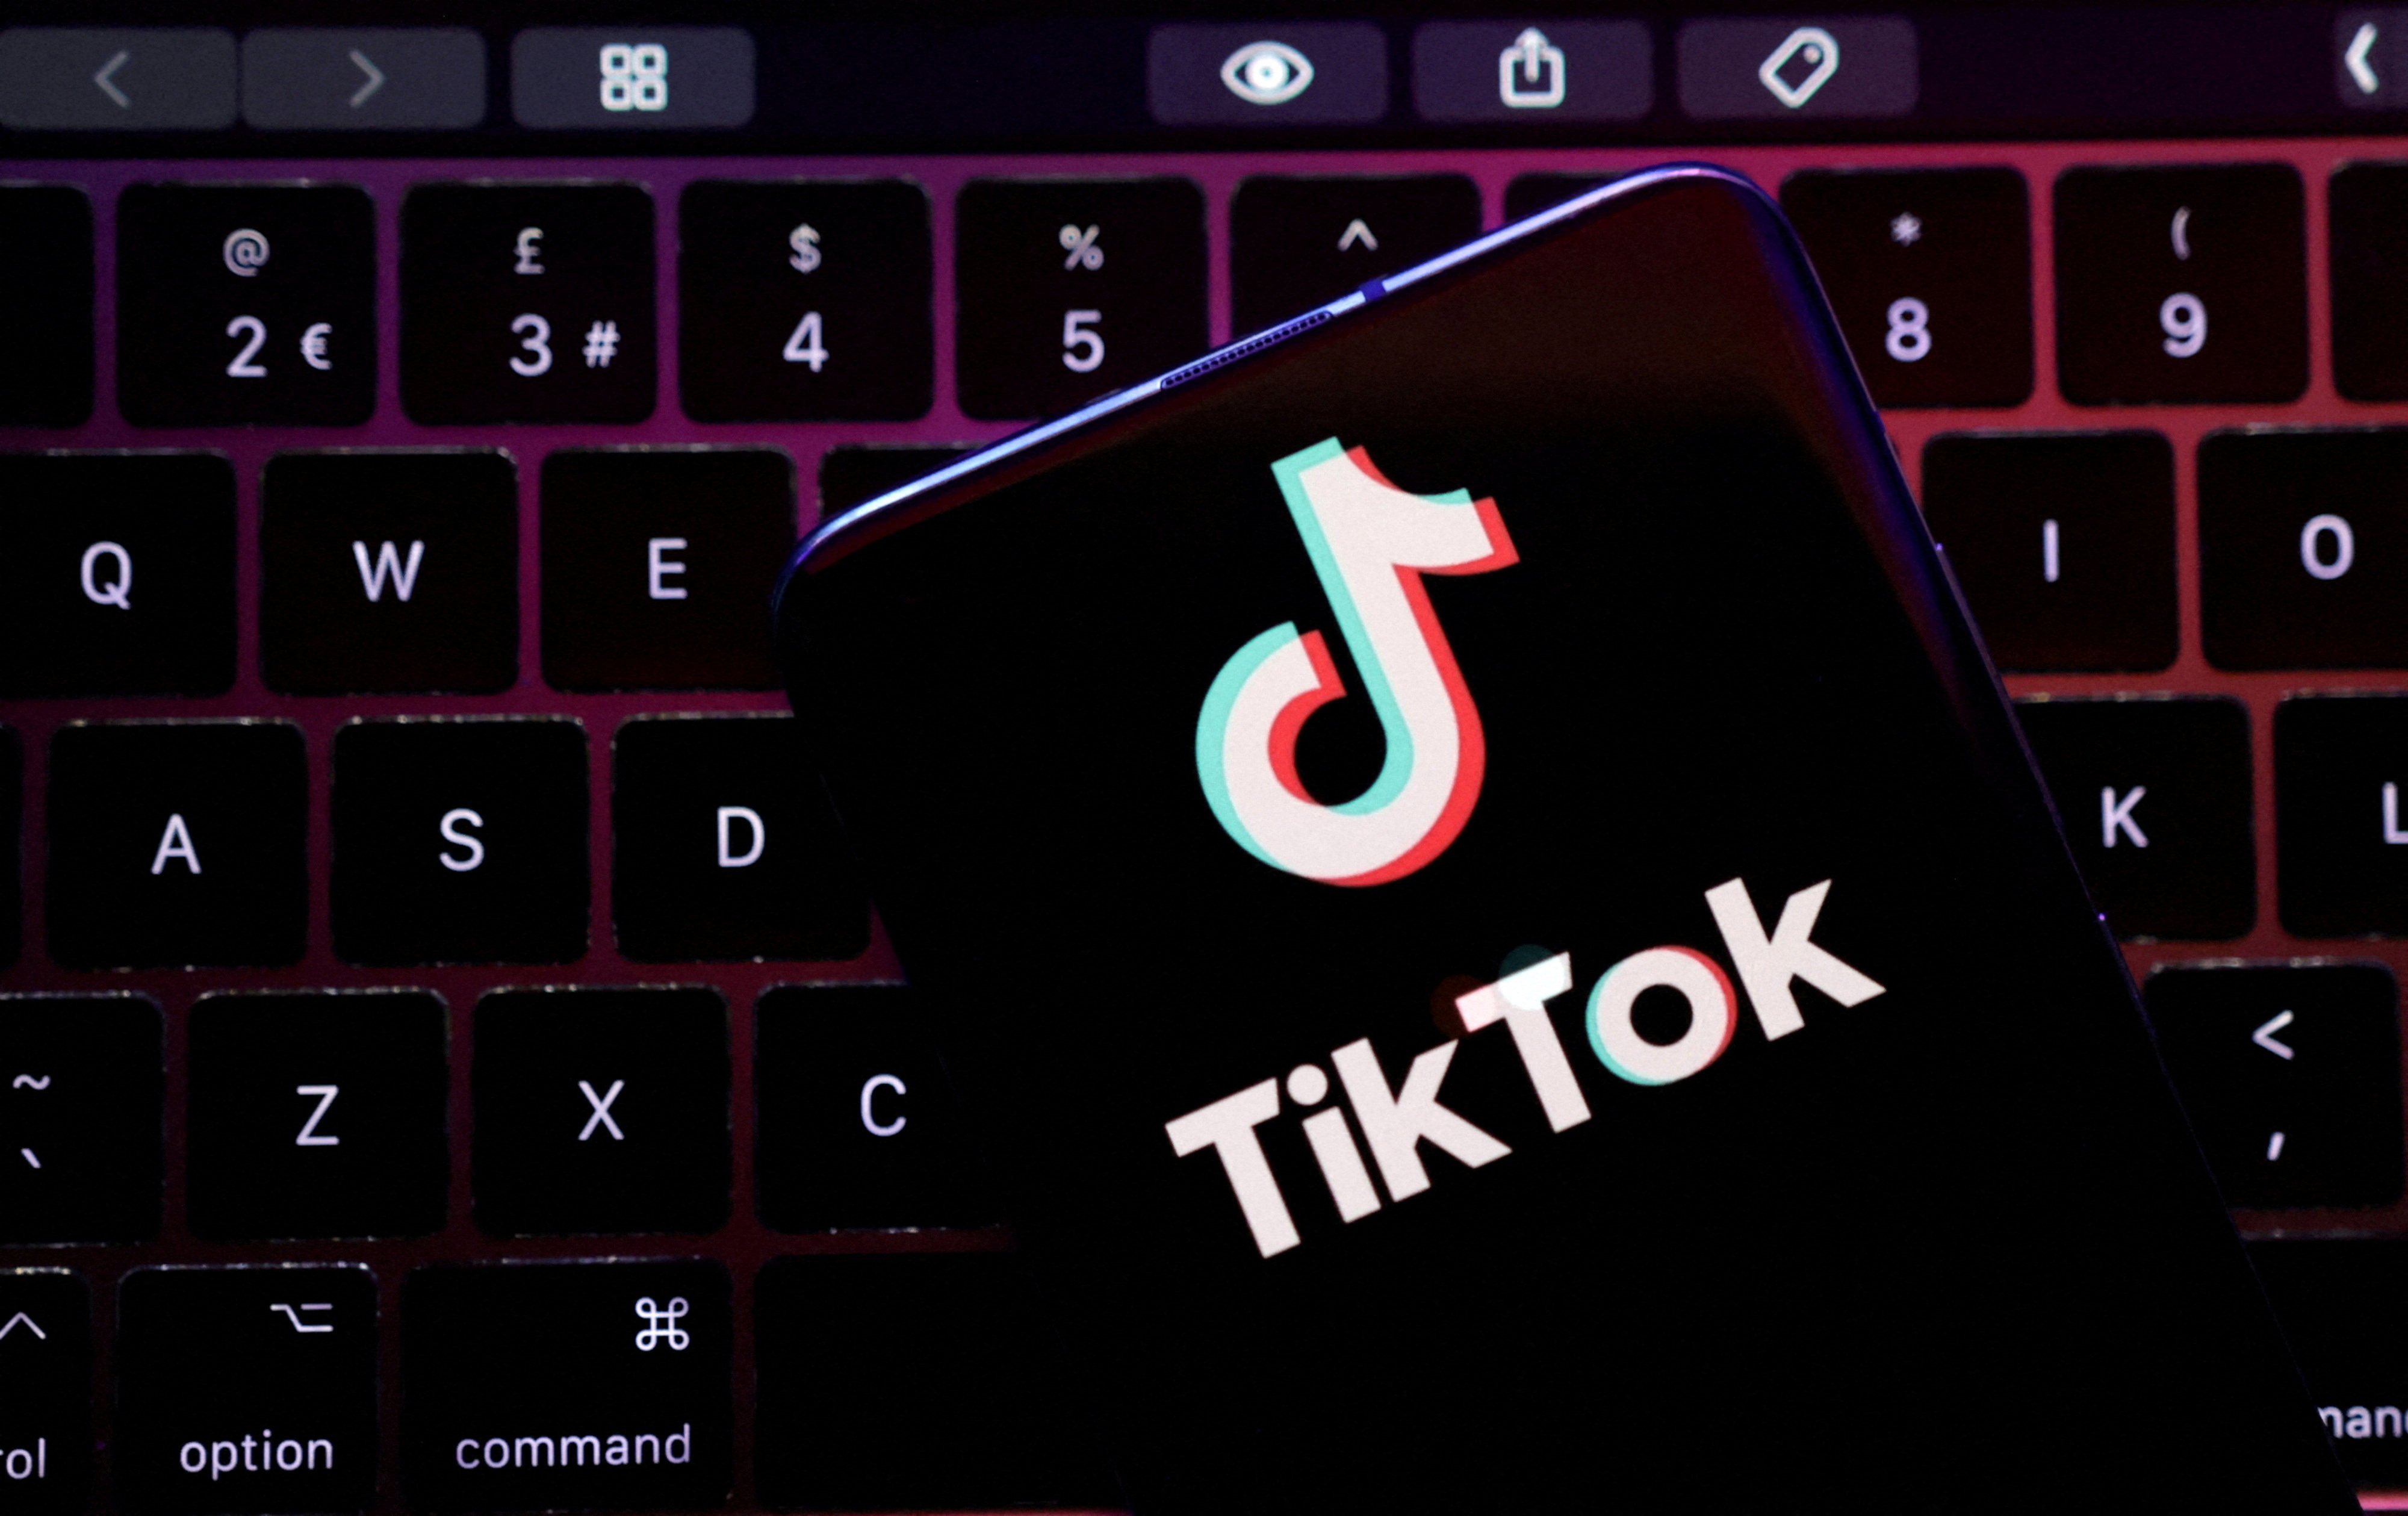 Nepal’s internet service providers have been asked to close the TikTok app. Photo: Reuters